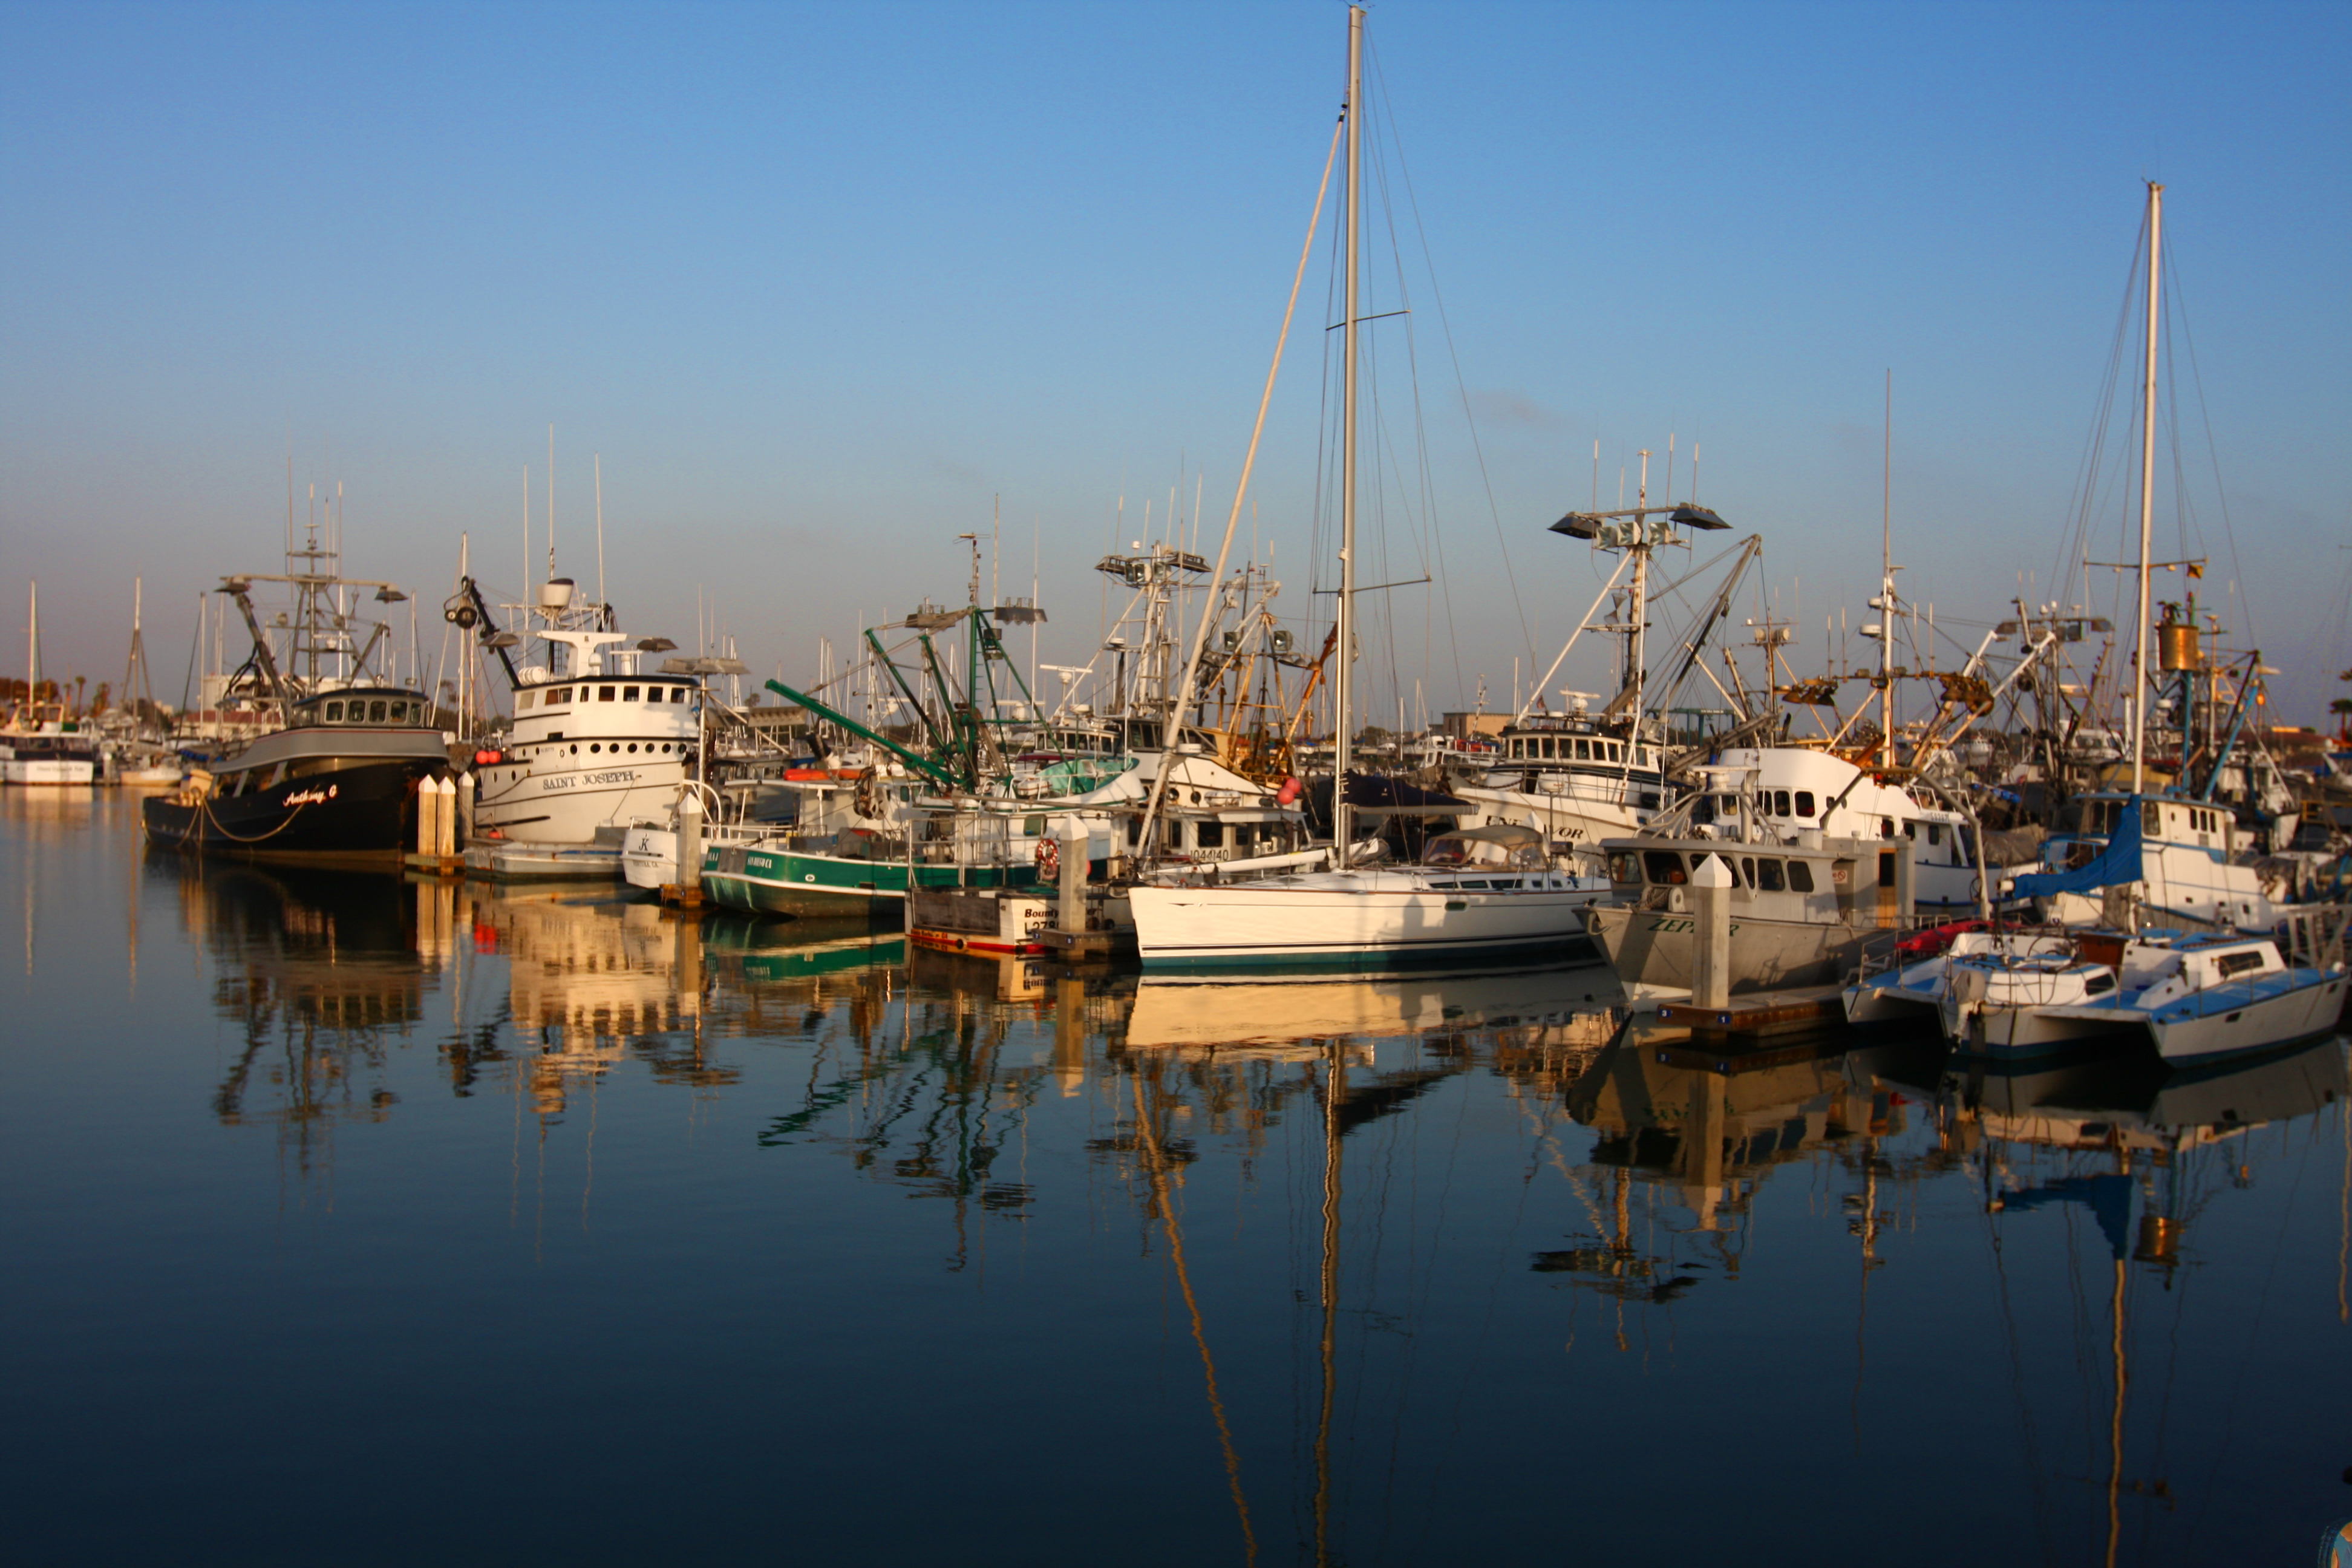 File:Small Boats in a Harbor (3519068744).jpg - Wikimedia Commons